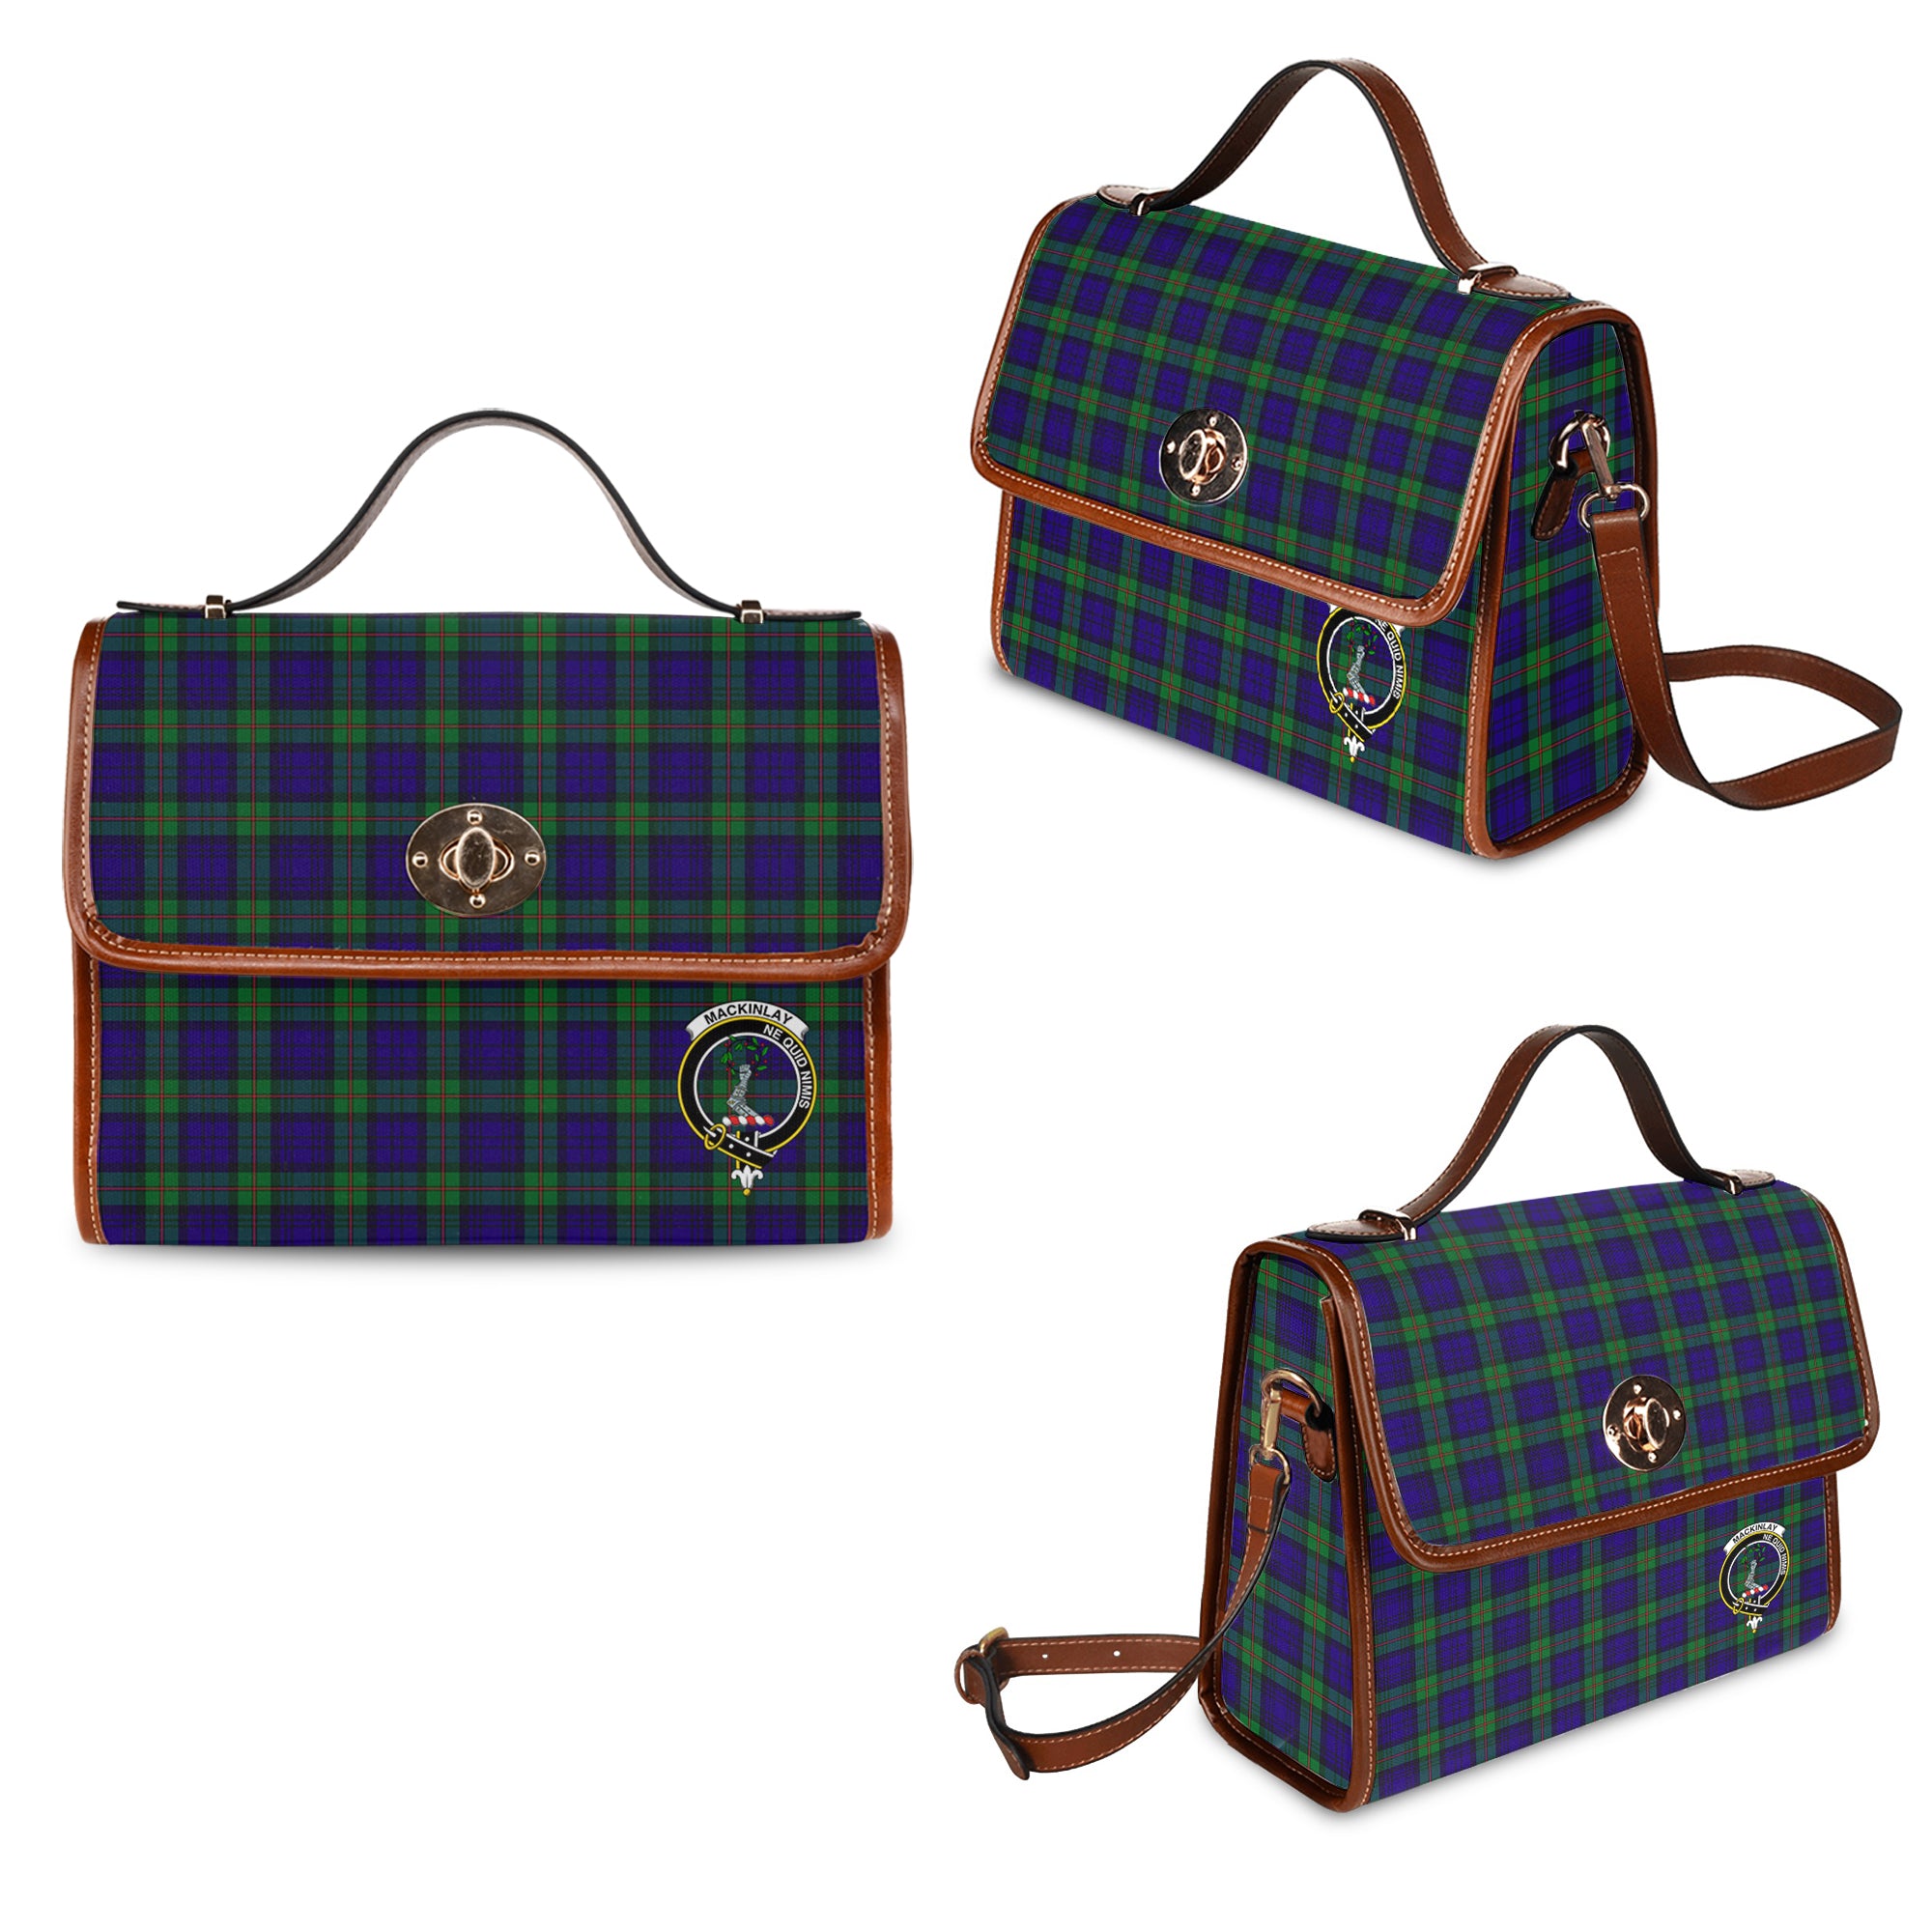 mackinlay-modern-family-crest-tartan-canvas-bag-with-leather-shoulder-strap